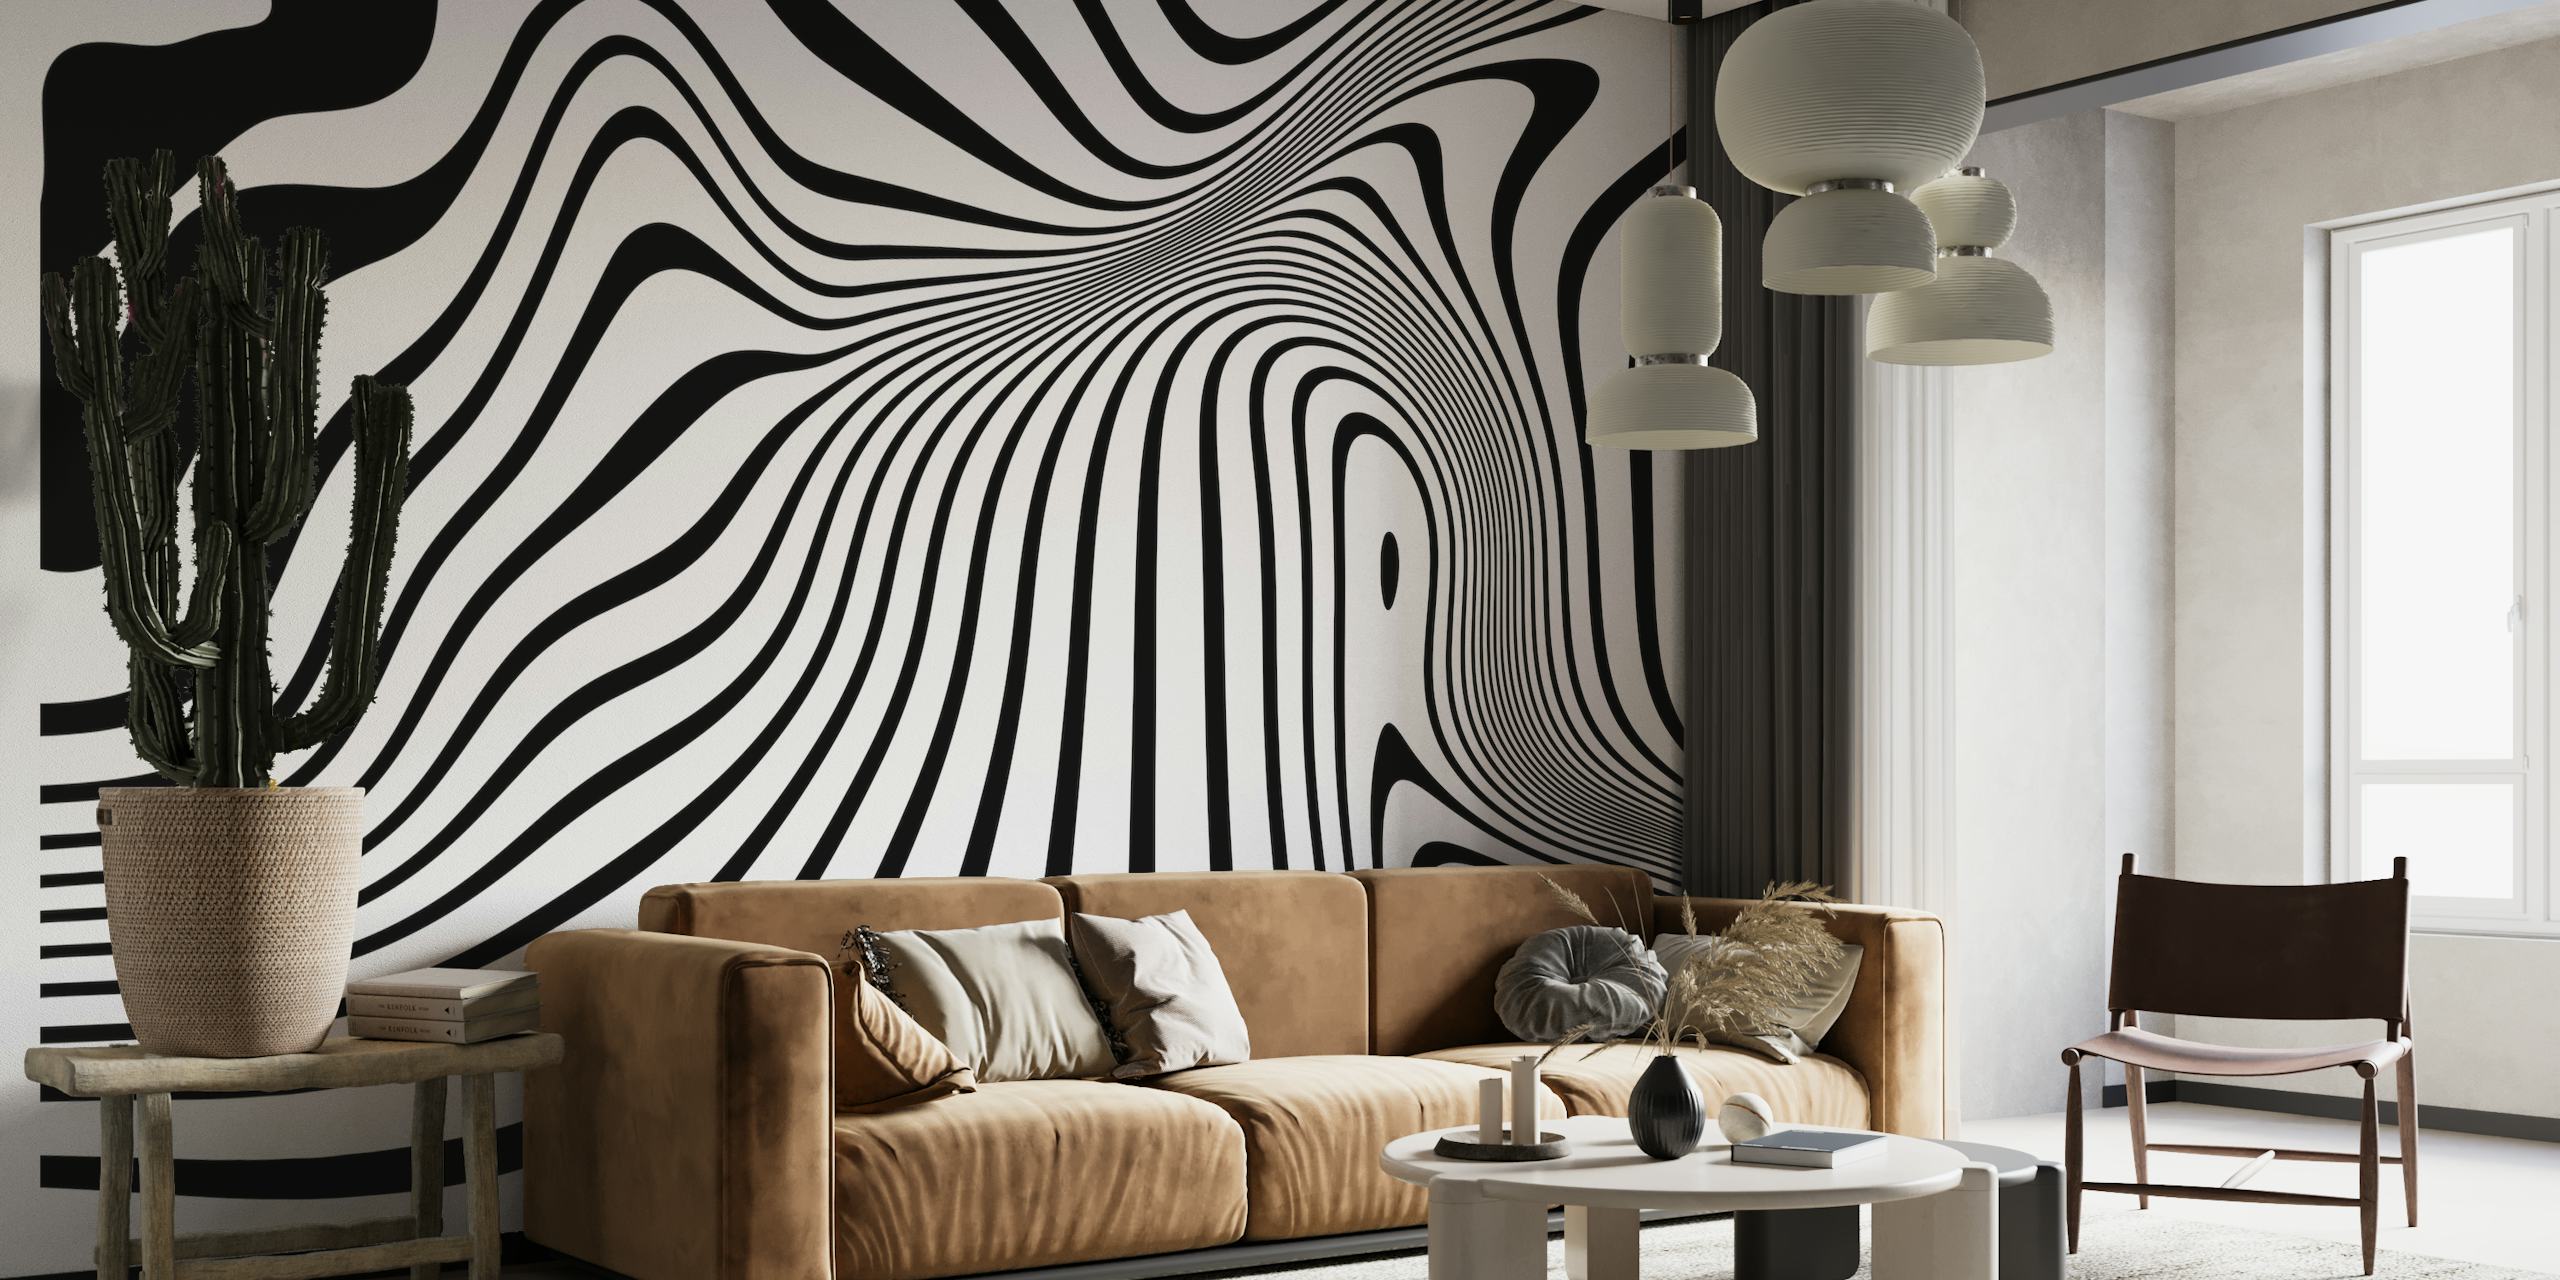 Abstract line art black and white wall mural with flowing, organic shapes creating a dynamic visual texture